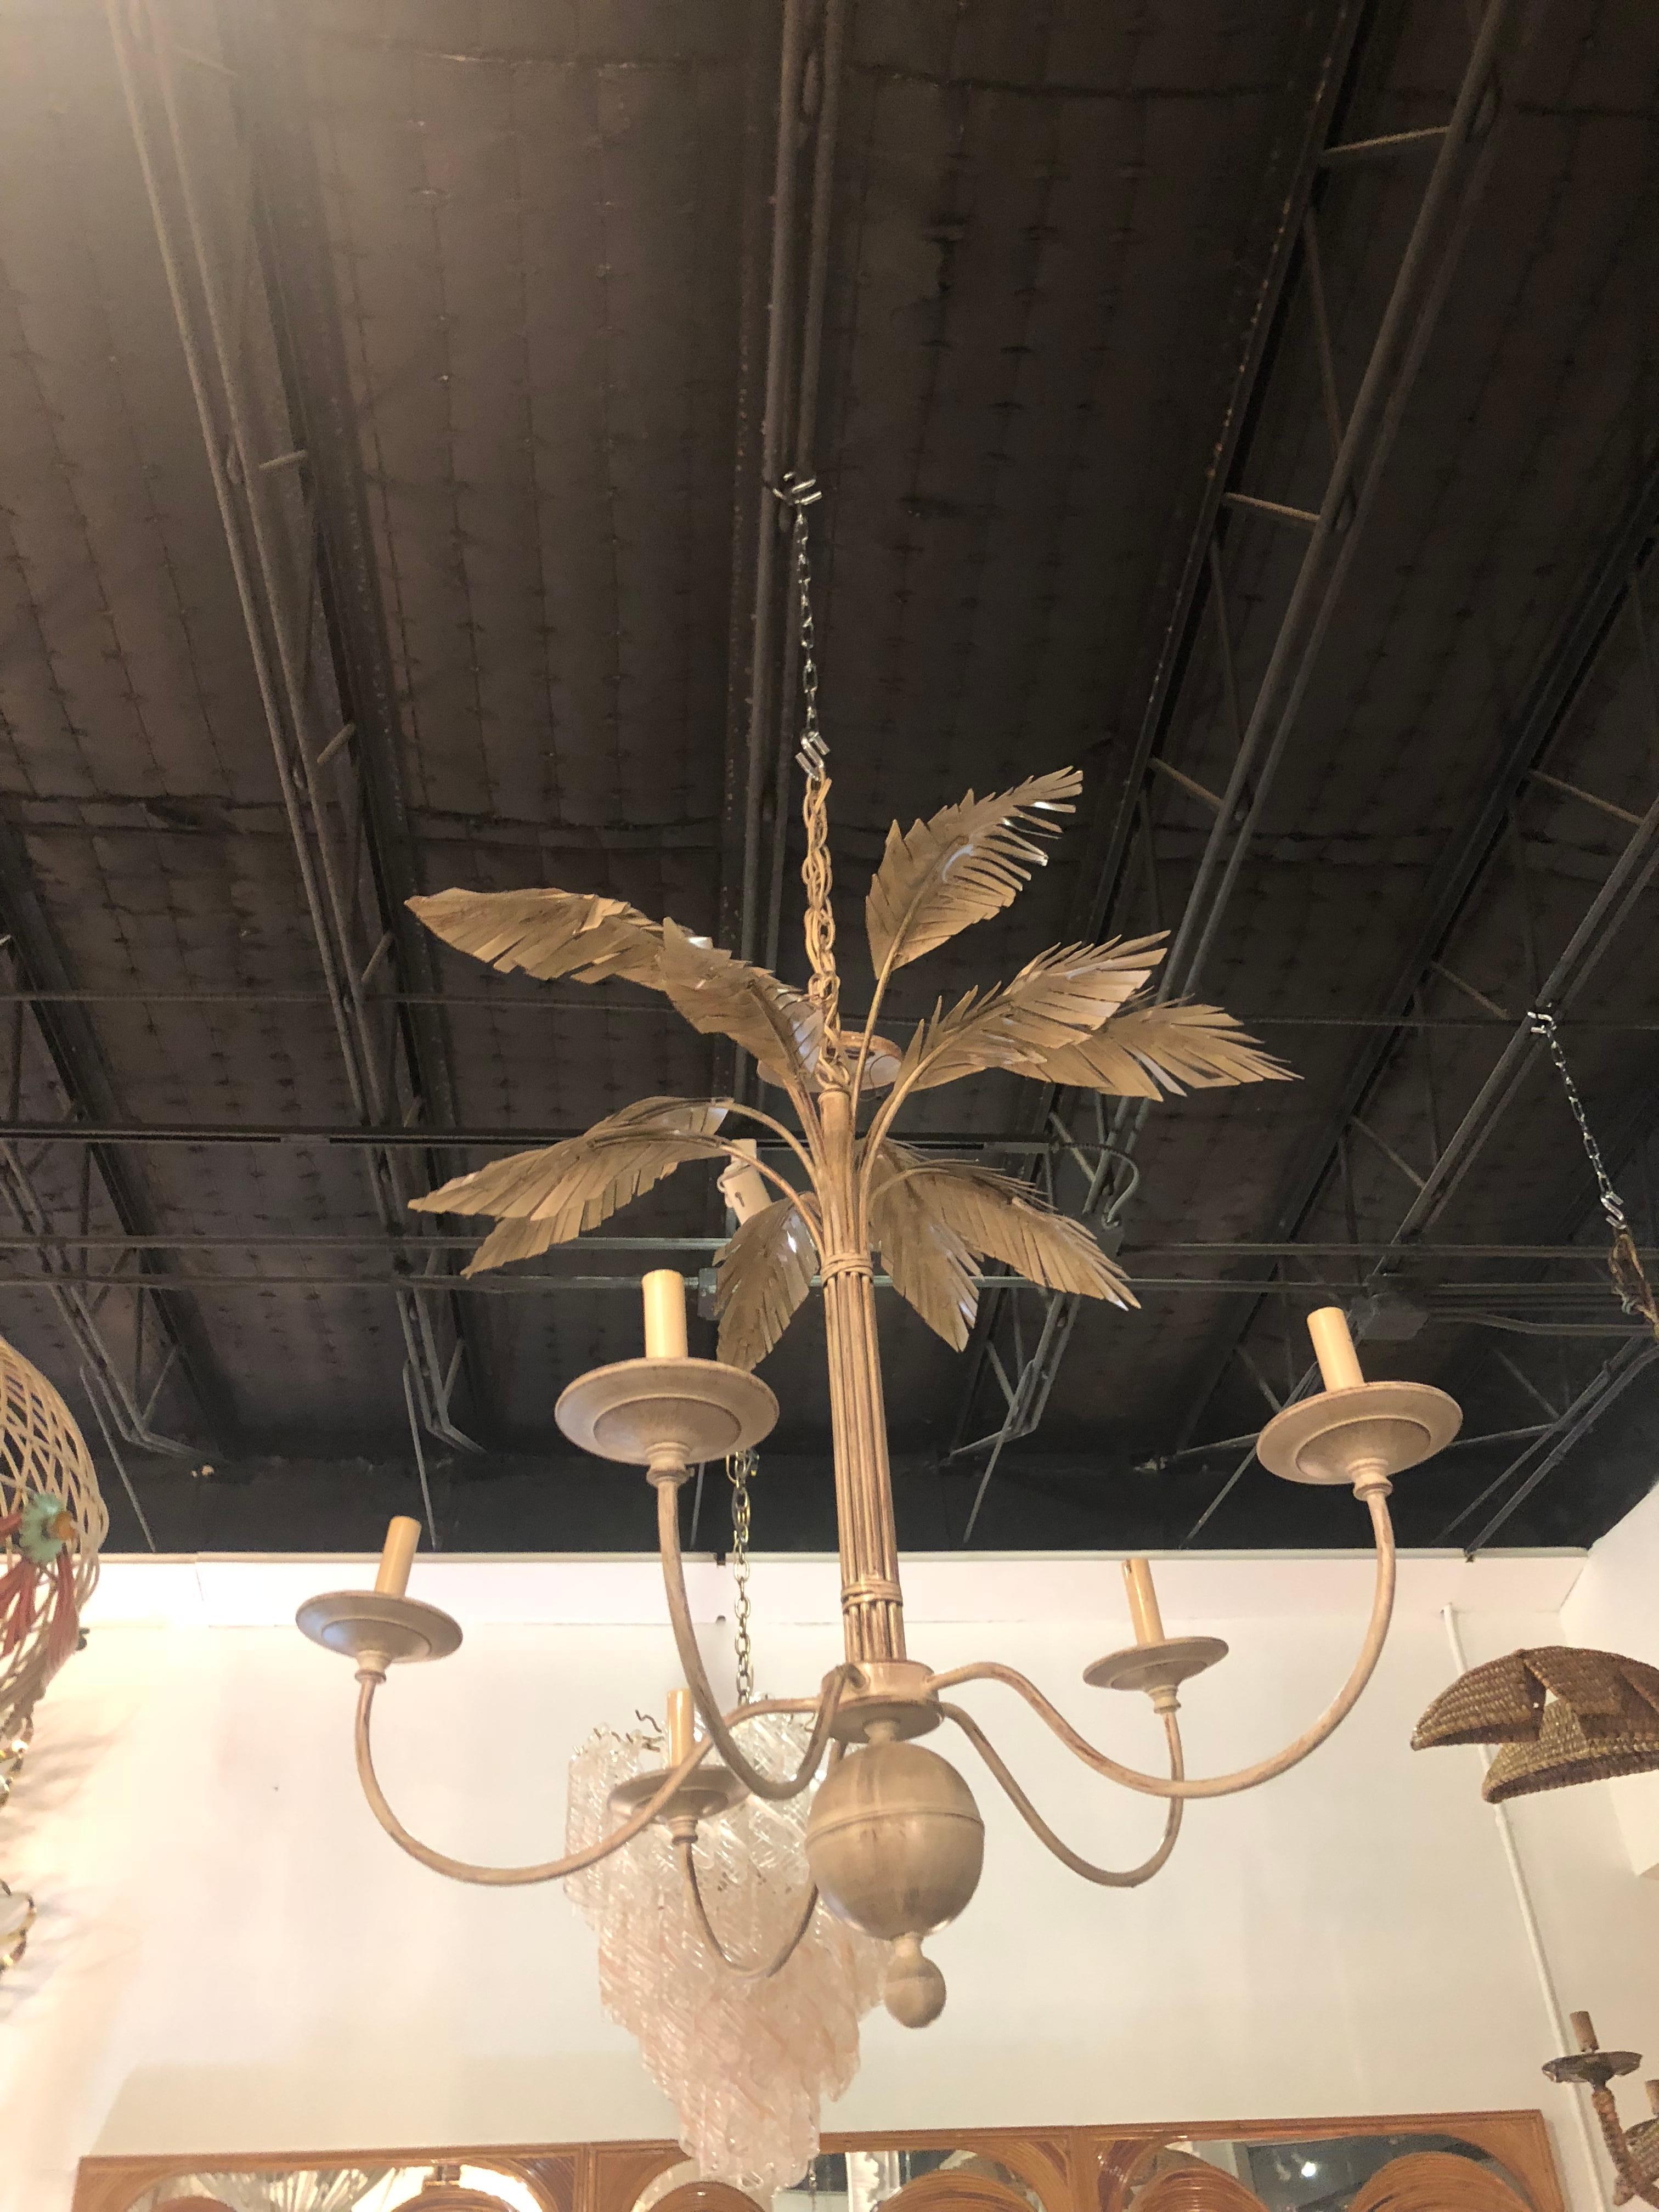 Vintage palm tree leaf chandelier, 5 lights. Comes with matching ceiling cap.